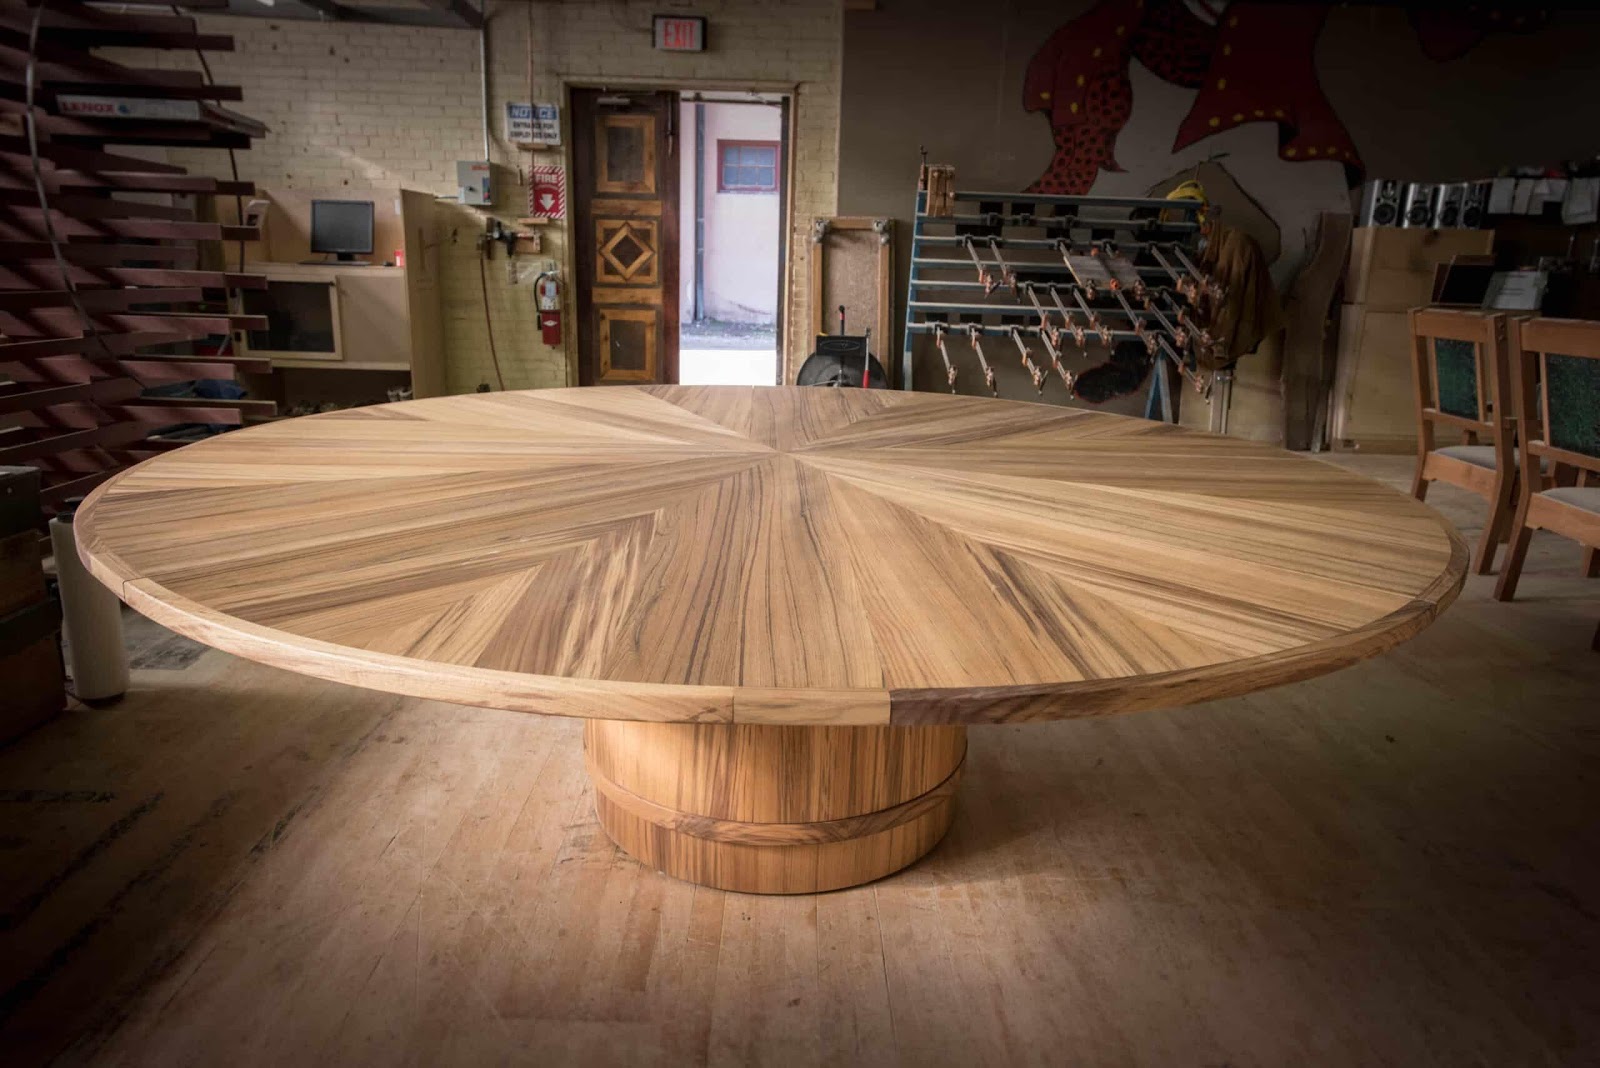 8 Leaf Expanding Round Table Side View - McHugh